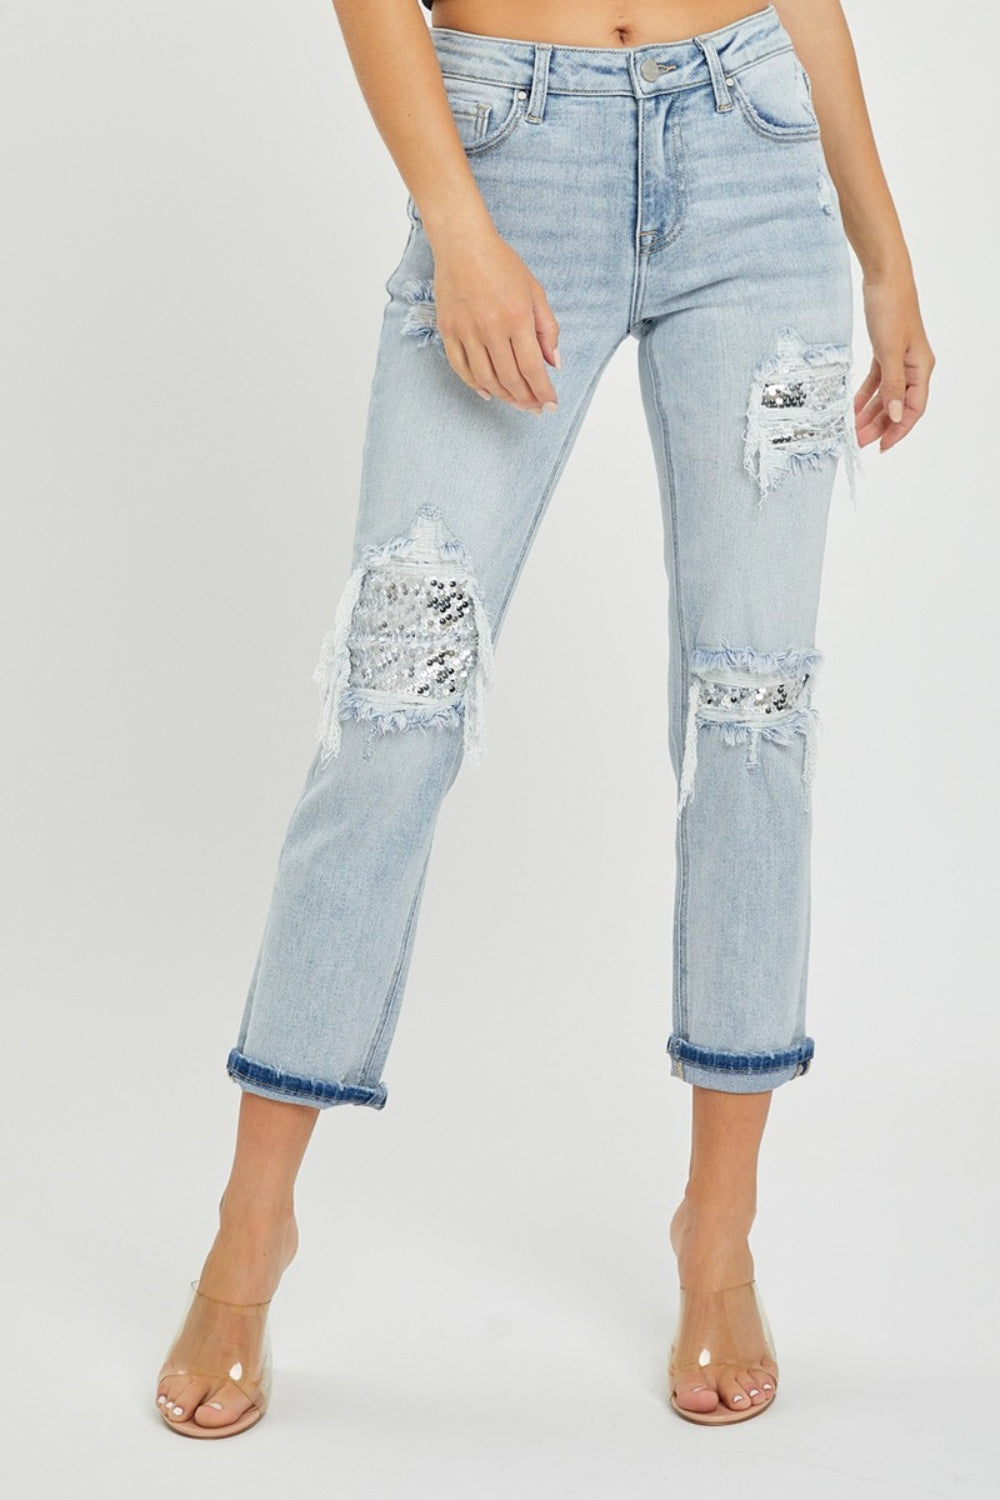 RISEN Mid-Rise Sequin Patched Jeans - Jeans - FITGGINS